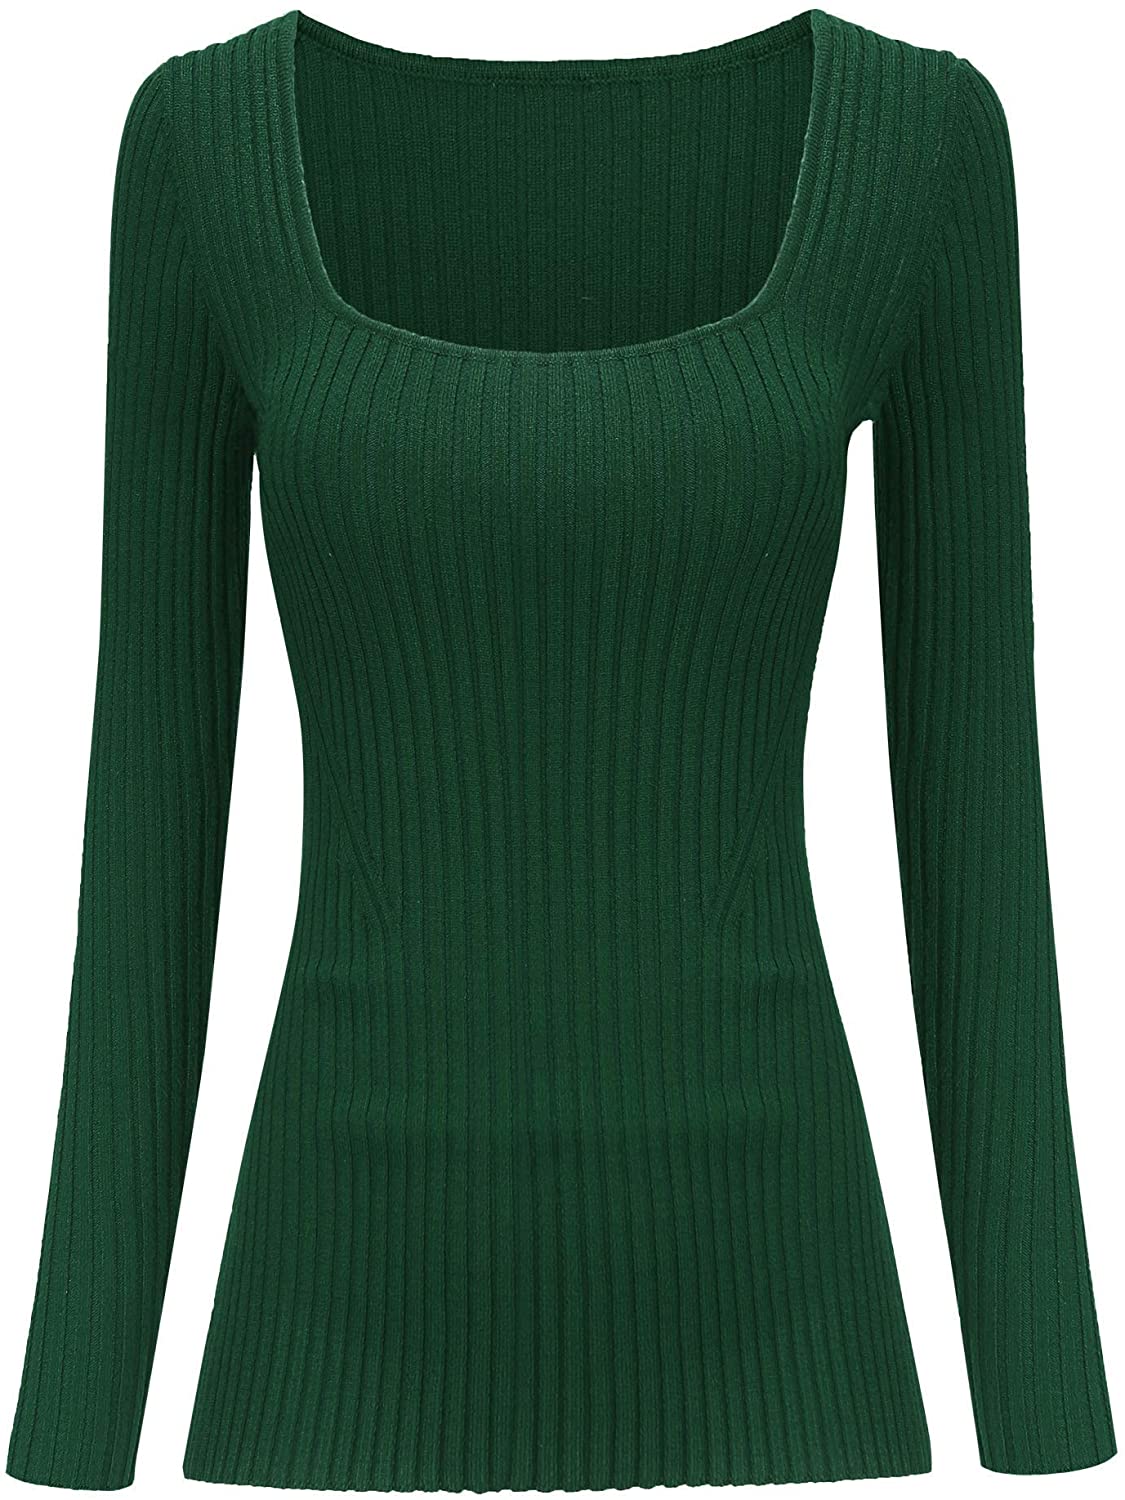 v28 Women Square Neck Knit Elasticity Stretchable Long Sleeve Slim Sweater Tops 